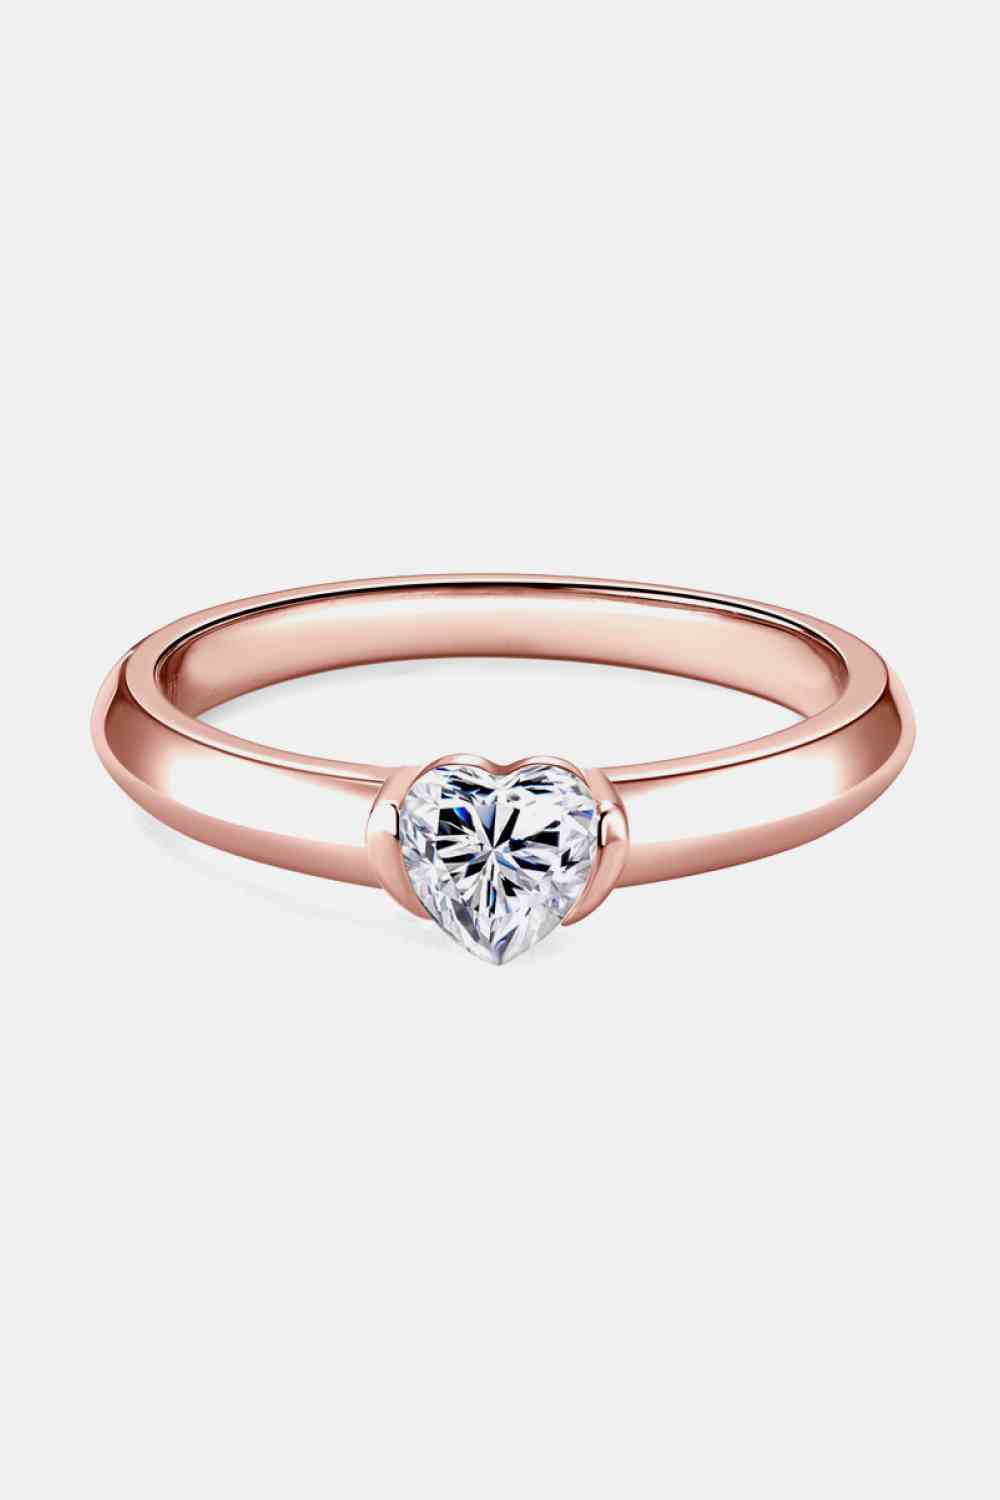 Moissanite 925 Sterling Silver Heart Solitaire Ring - Shop Tophatter Deals, Electronics, Fashion, Jewelry, Health, Beauty, Home Decor, Free Shipping